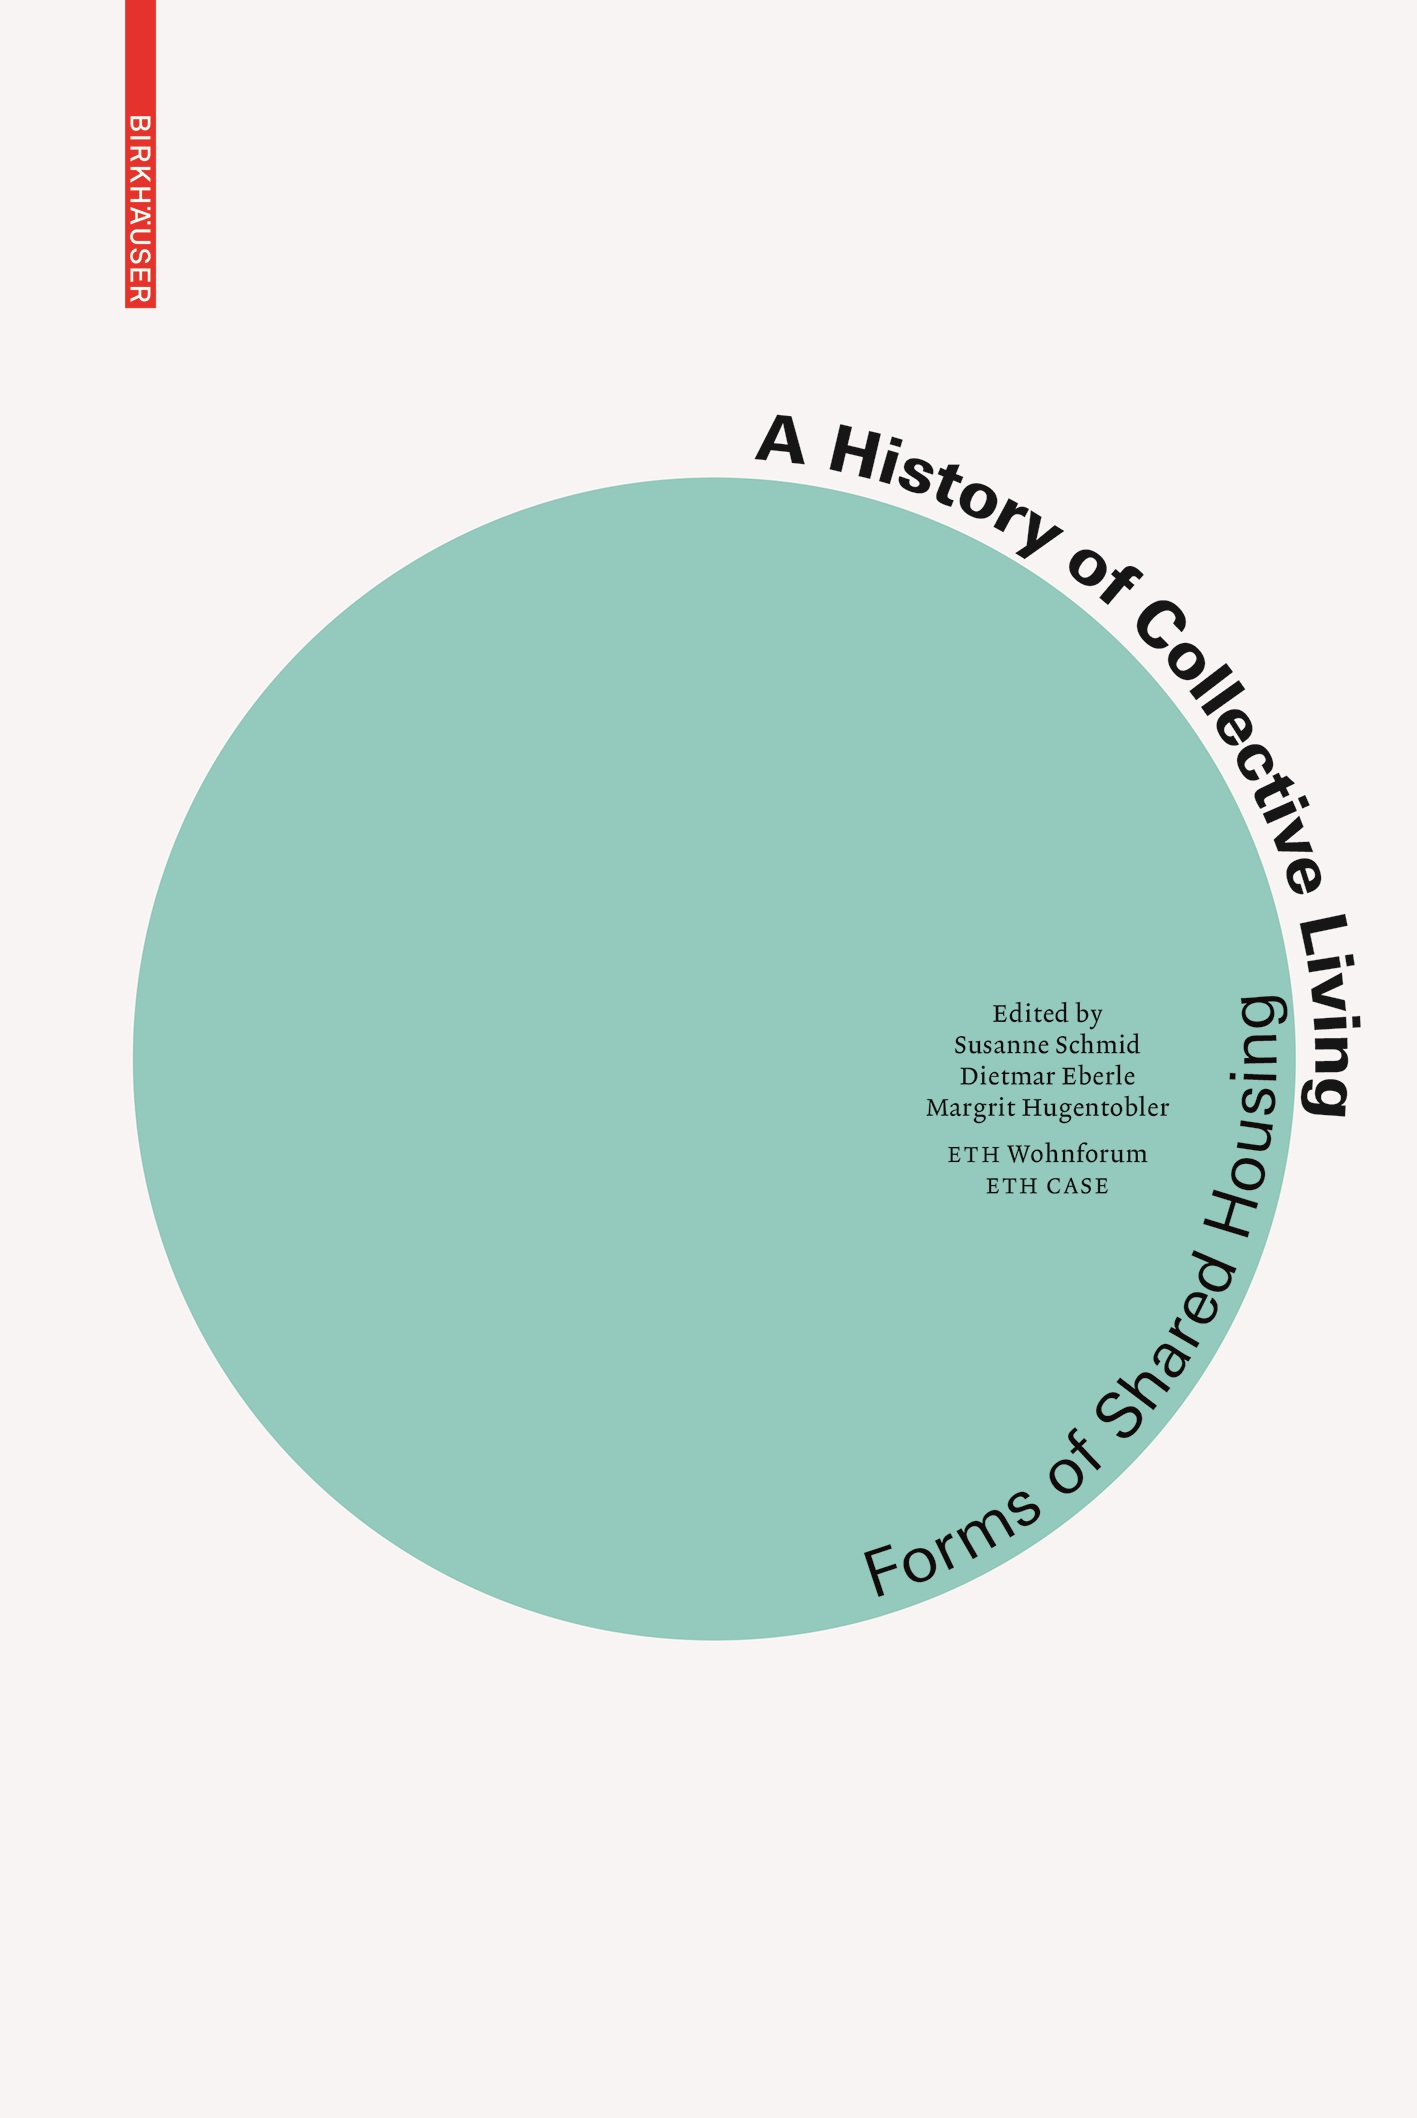 BDT_27 – A History of Collective Living. Forms of Shared Housing